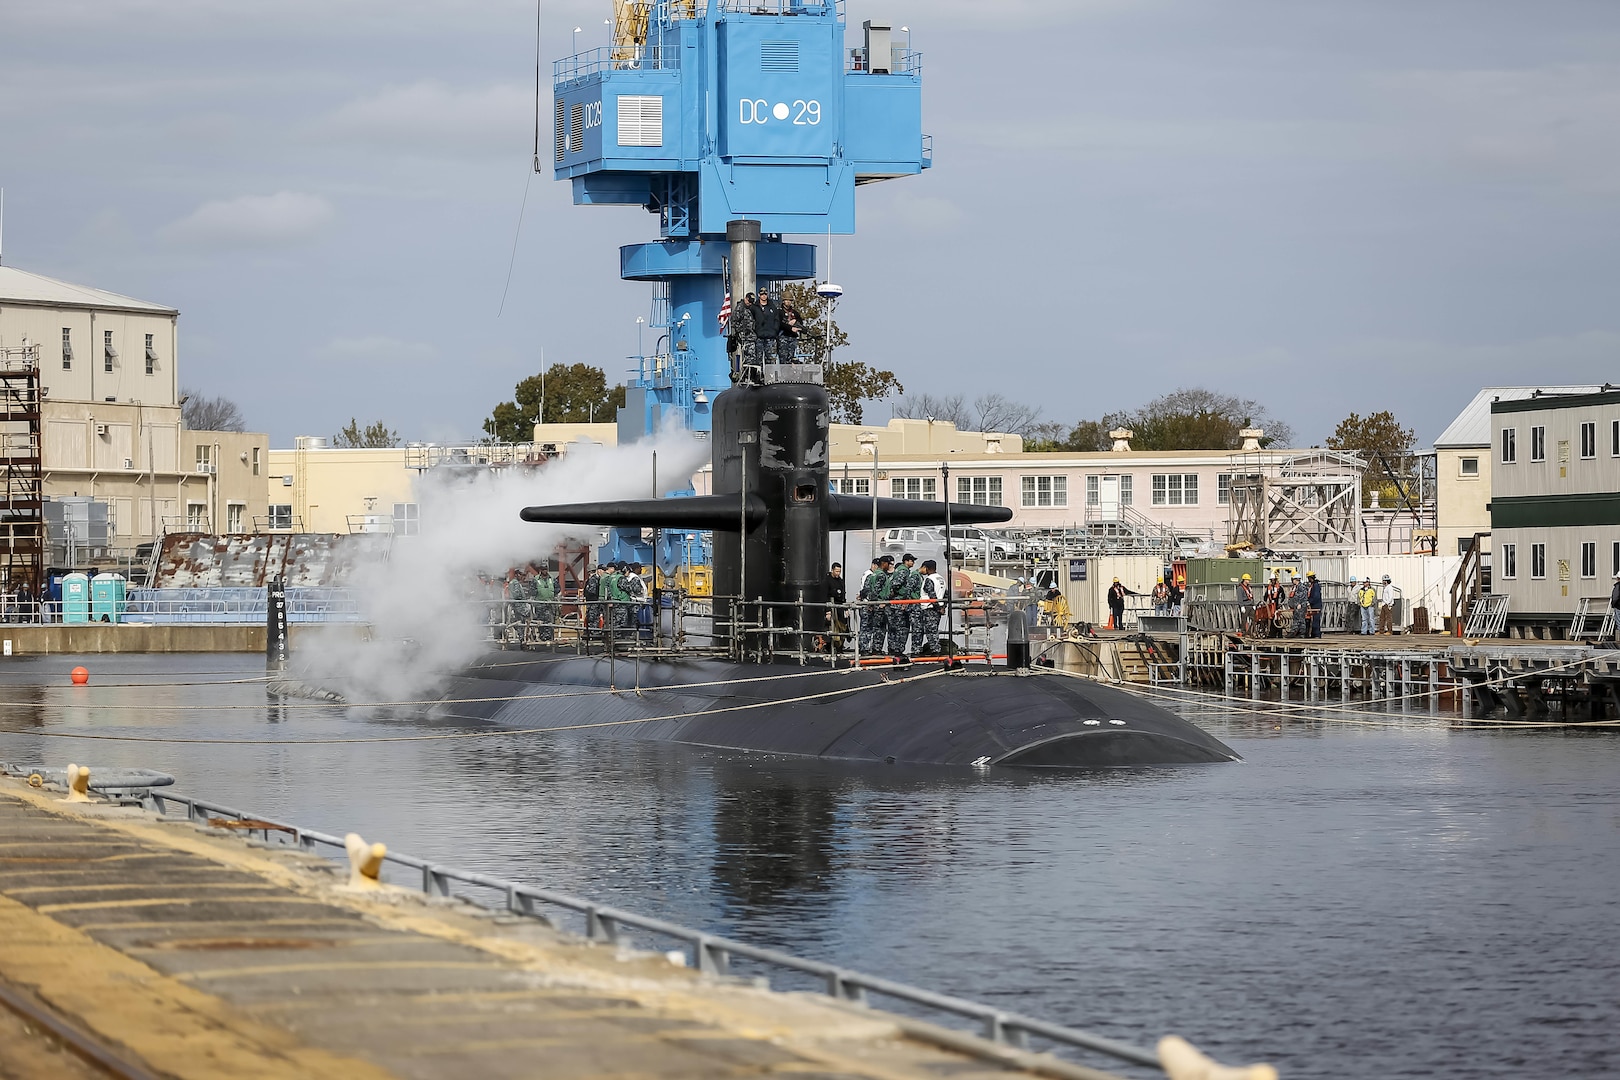 151026-N-MA158-006 (Oct. 26, 2015) PORTSMOUTH, Virginia - USS Helena (SSN 725) is pictured here at Norfolk Naval Shipyard (NNSY).